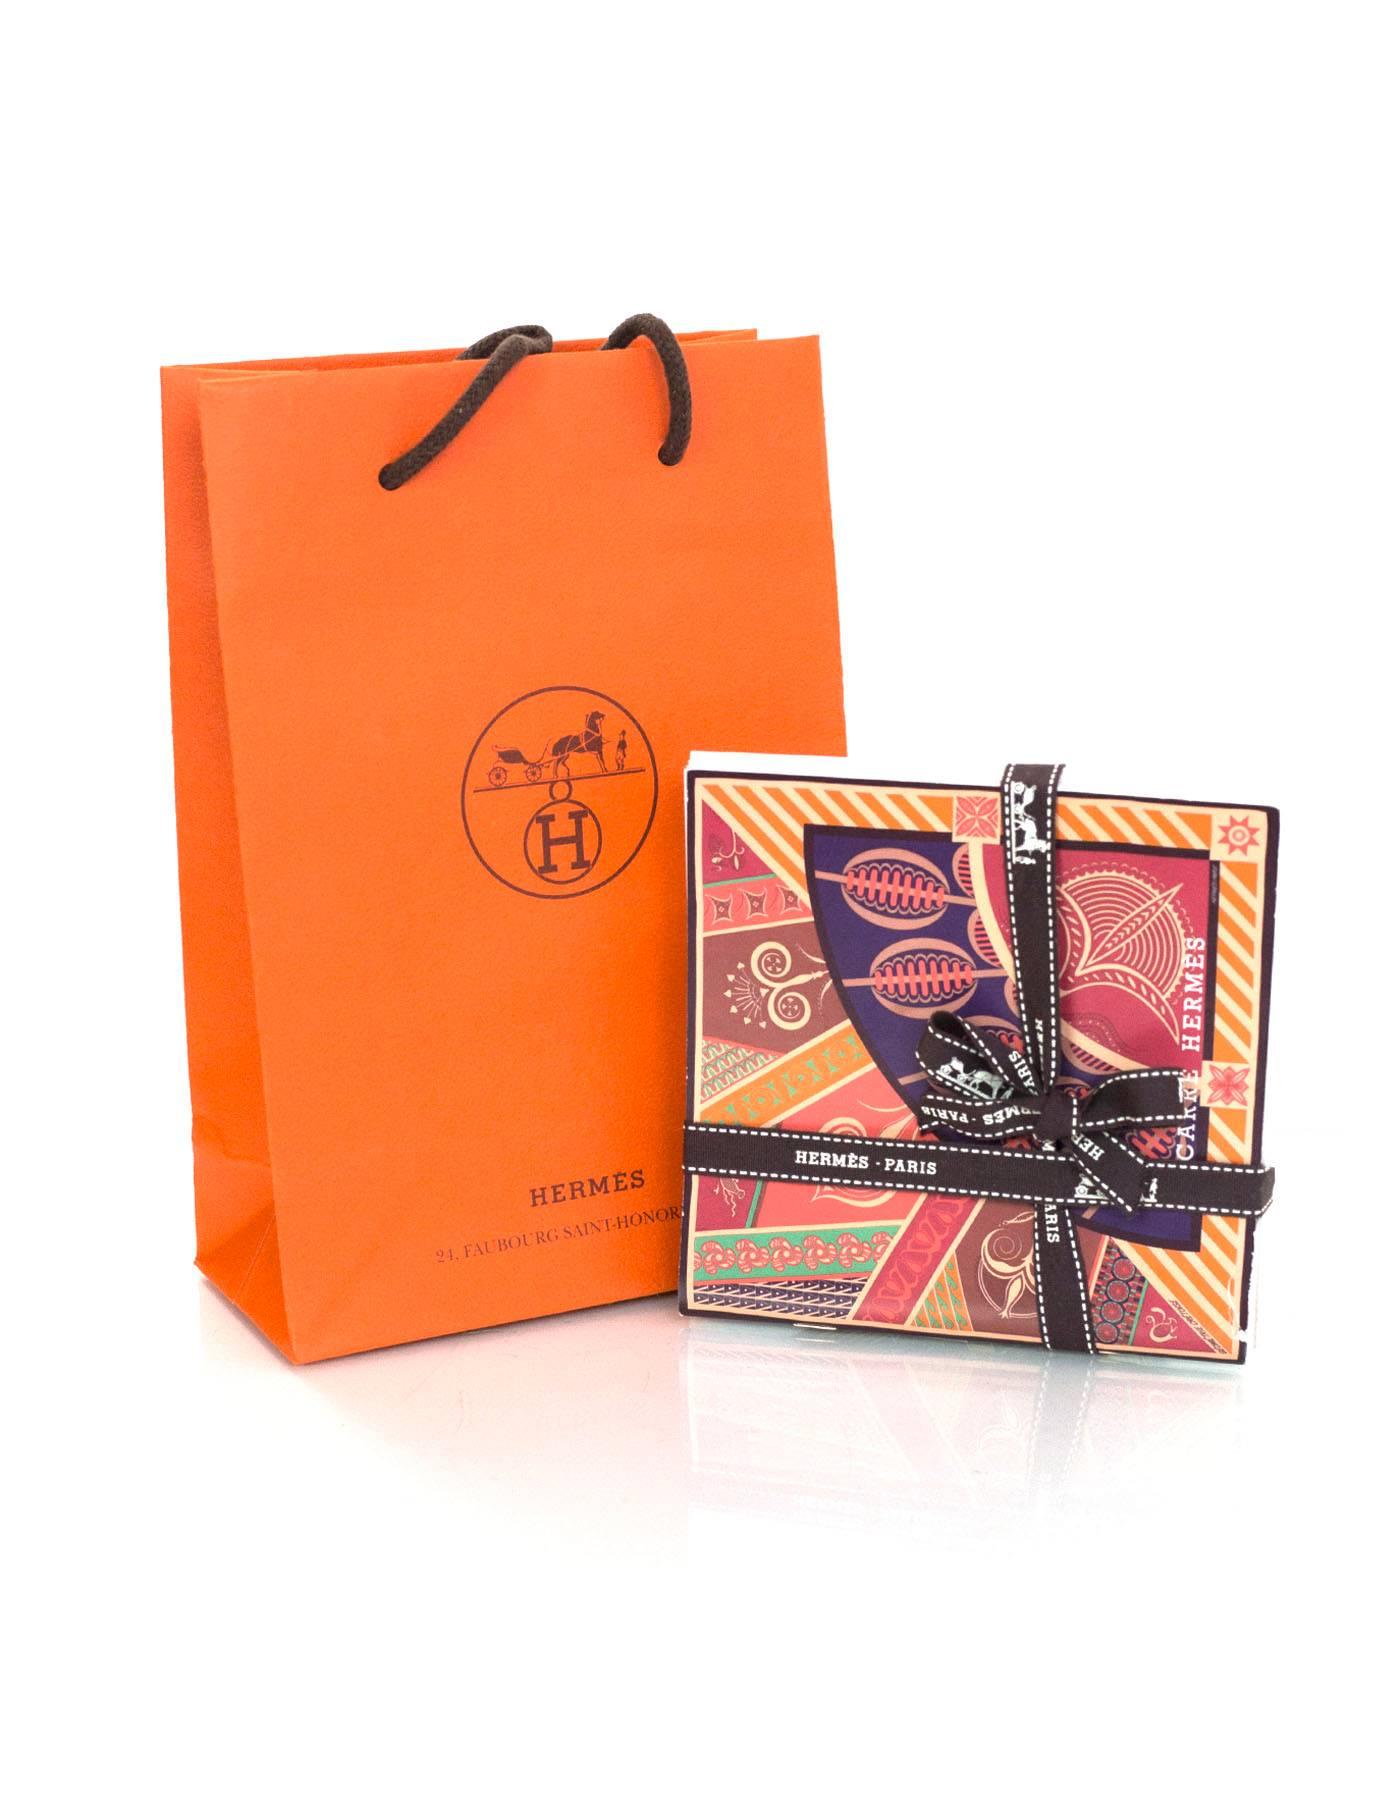 Set of four Hermes illustrated booklets featuring ways to tie Hermes scarves, prints and names. From SS '12, AW '13, SS '14 and SS '15. Shopping bag included.

Condition: Excellent pre-owned condition

Measurements:
Booklets: 5"W x 5"L